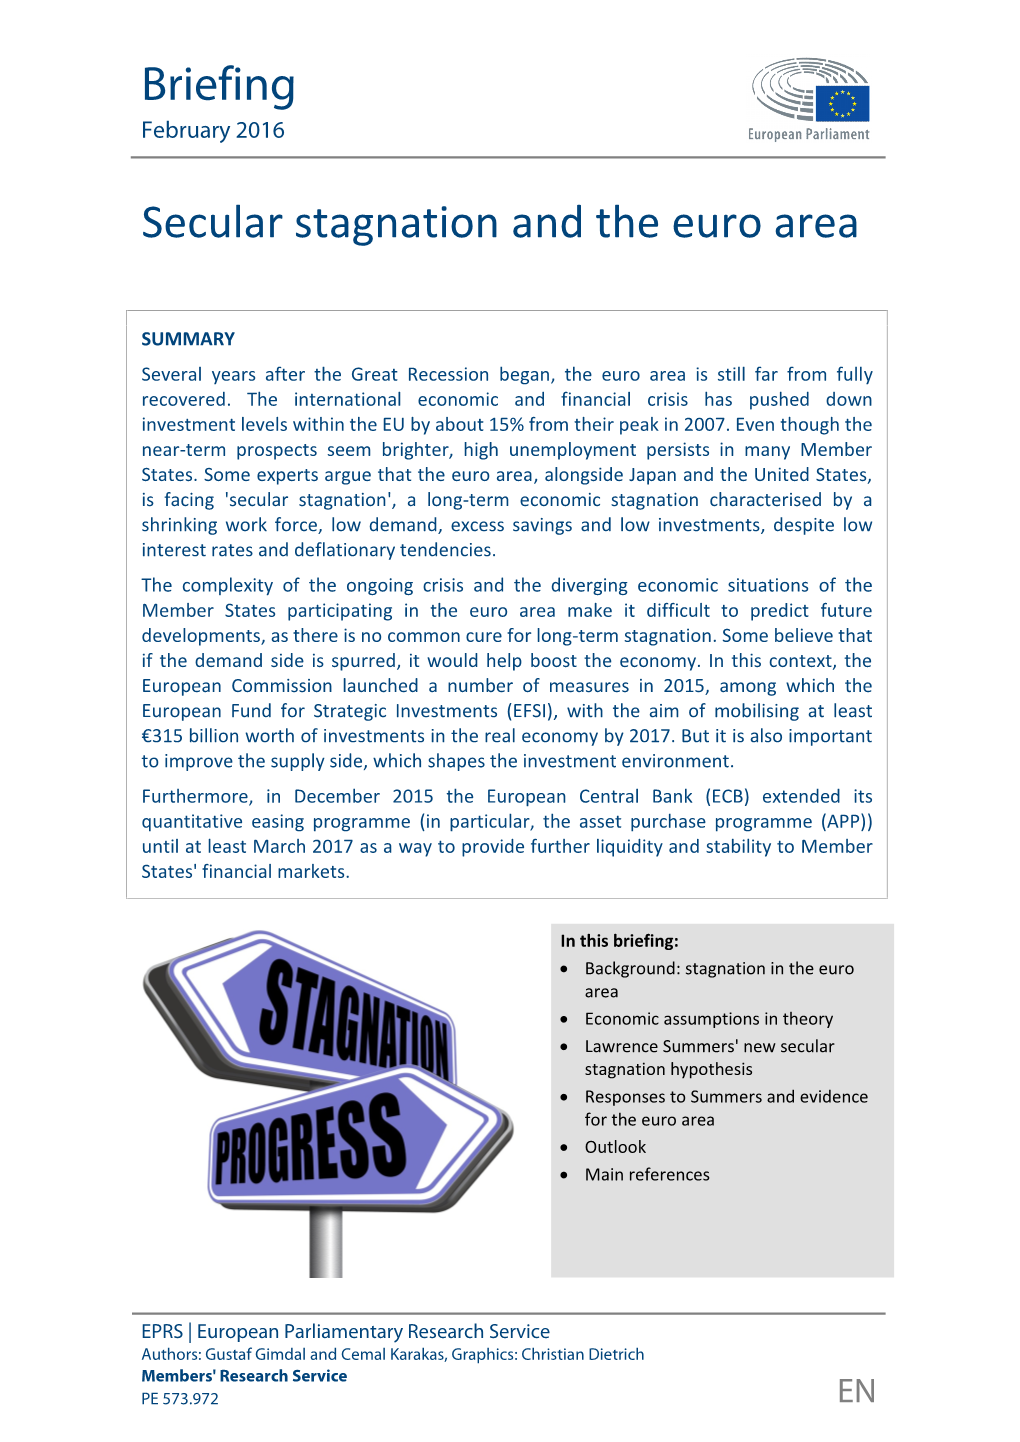 Secular Stagnation and the Euro Area